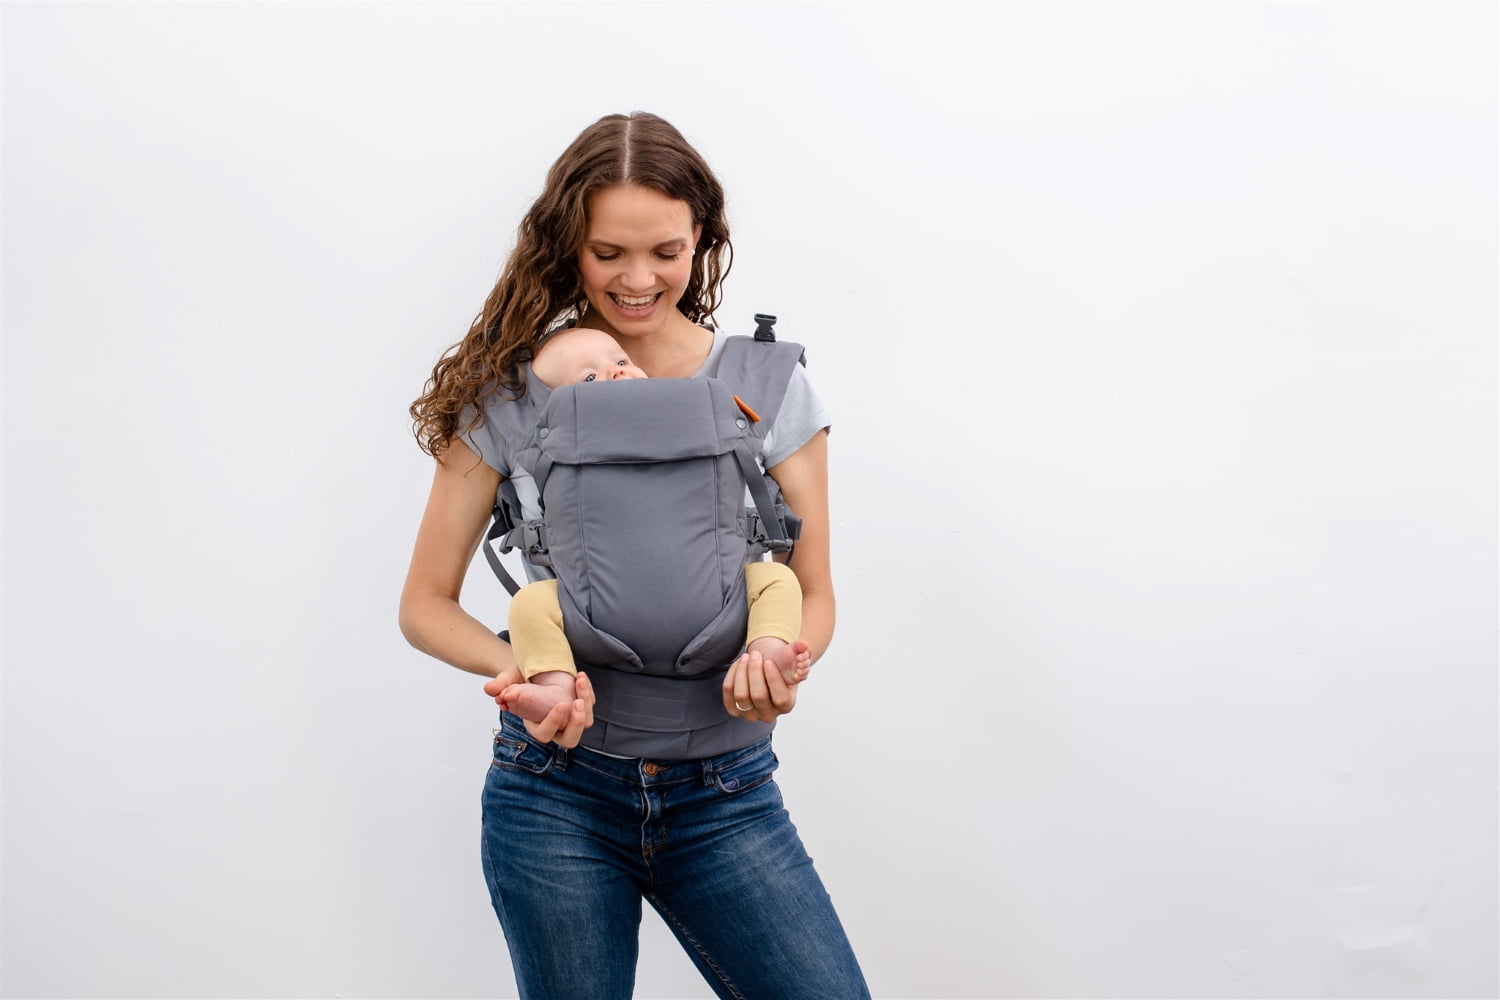 Beco Baby Carrier Gemini Grey Sleek And Simple 4 In 1 Xs Xxl All Position Backpack Style Sling For Holding Babies Infants And Child From 7 35 Lbs Certified Ergonomic Unisex Walmart Com